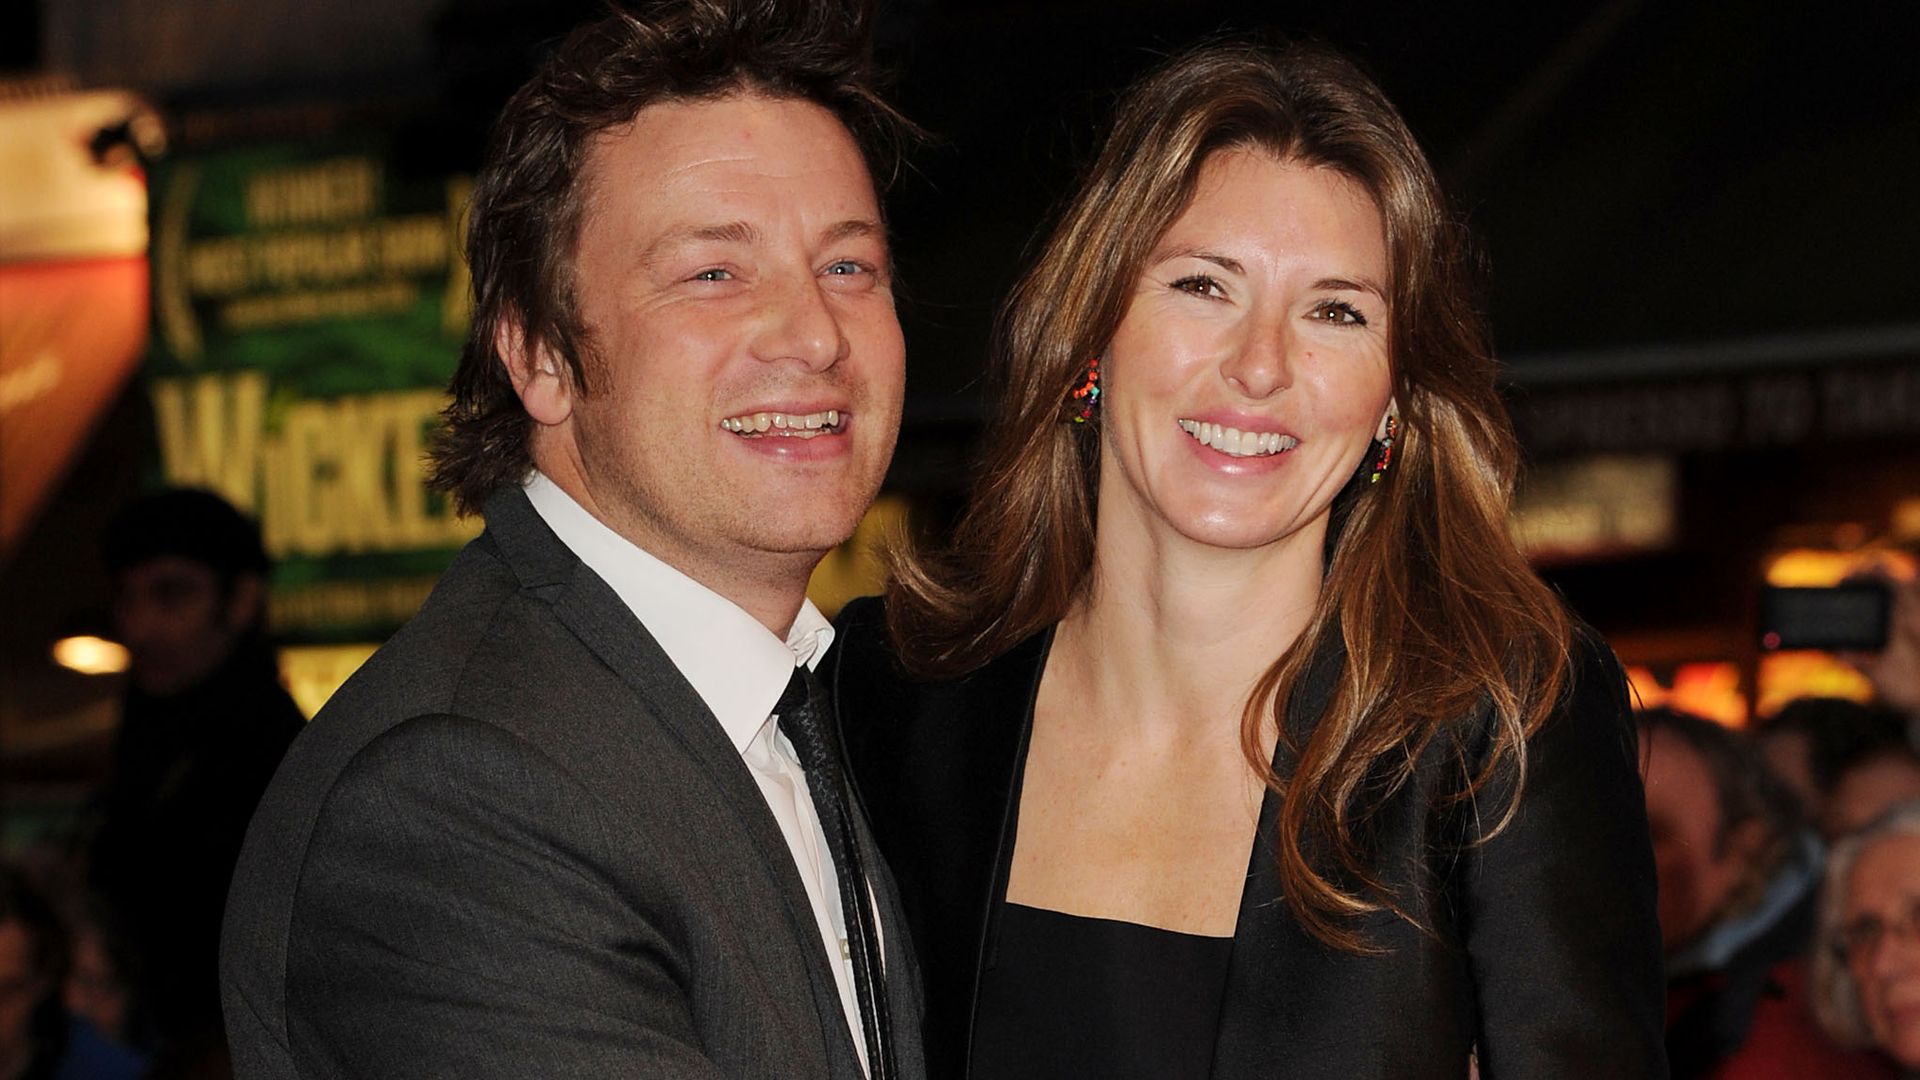 Jamie Oliver shares adorable unseen throwback photo with daughter Poppy